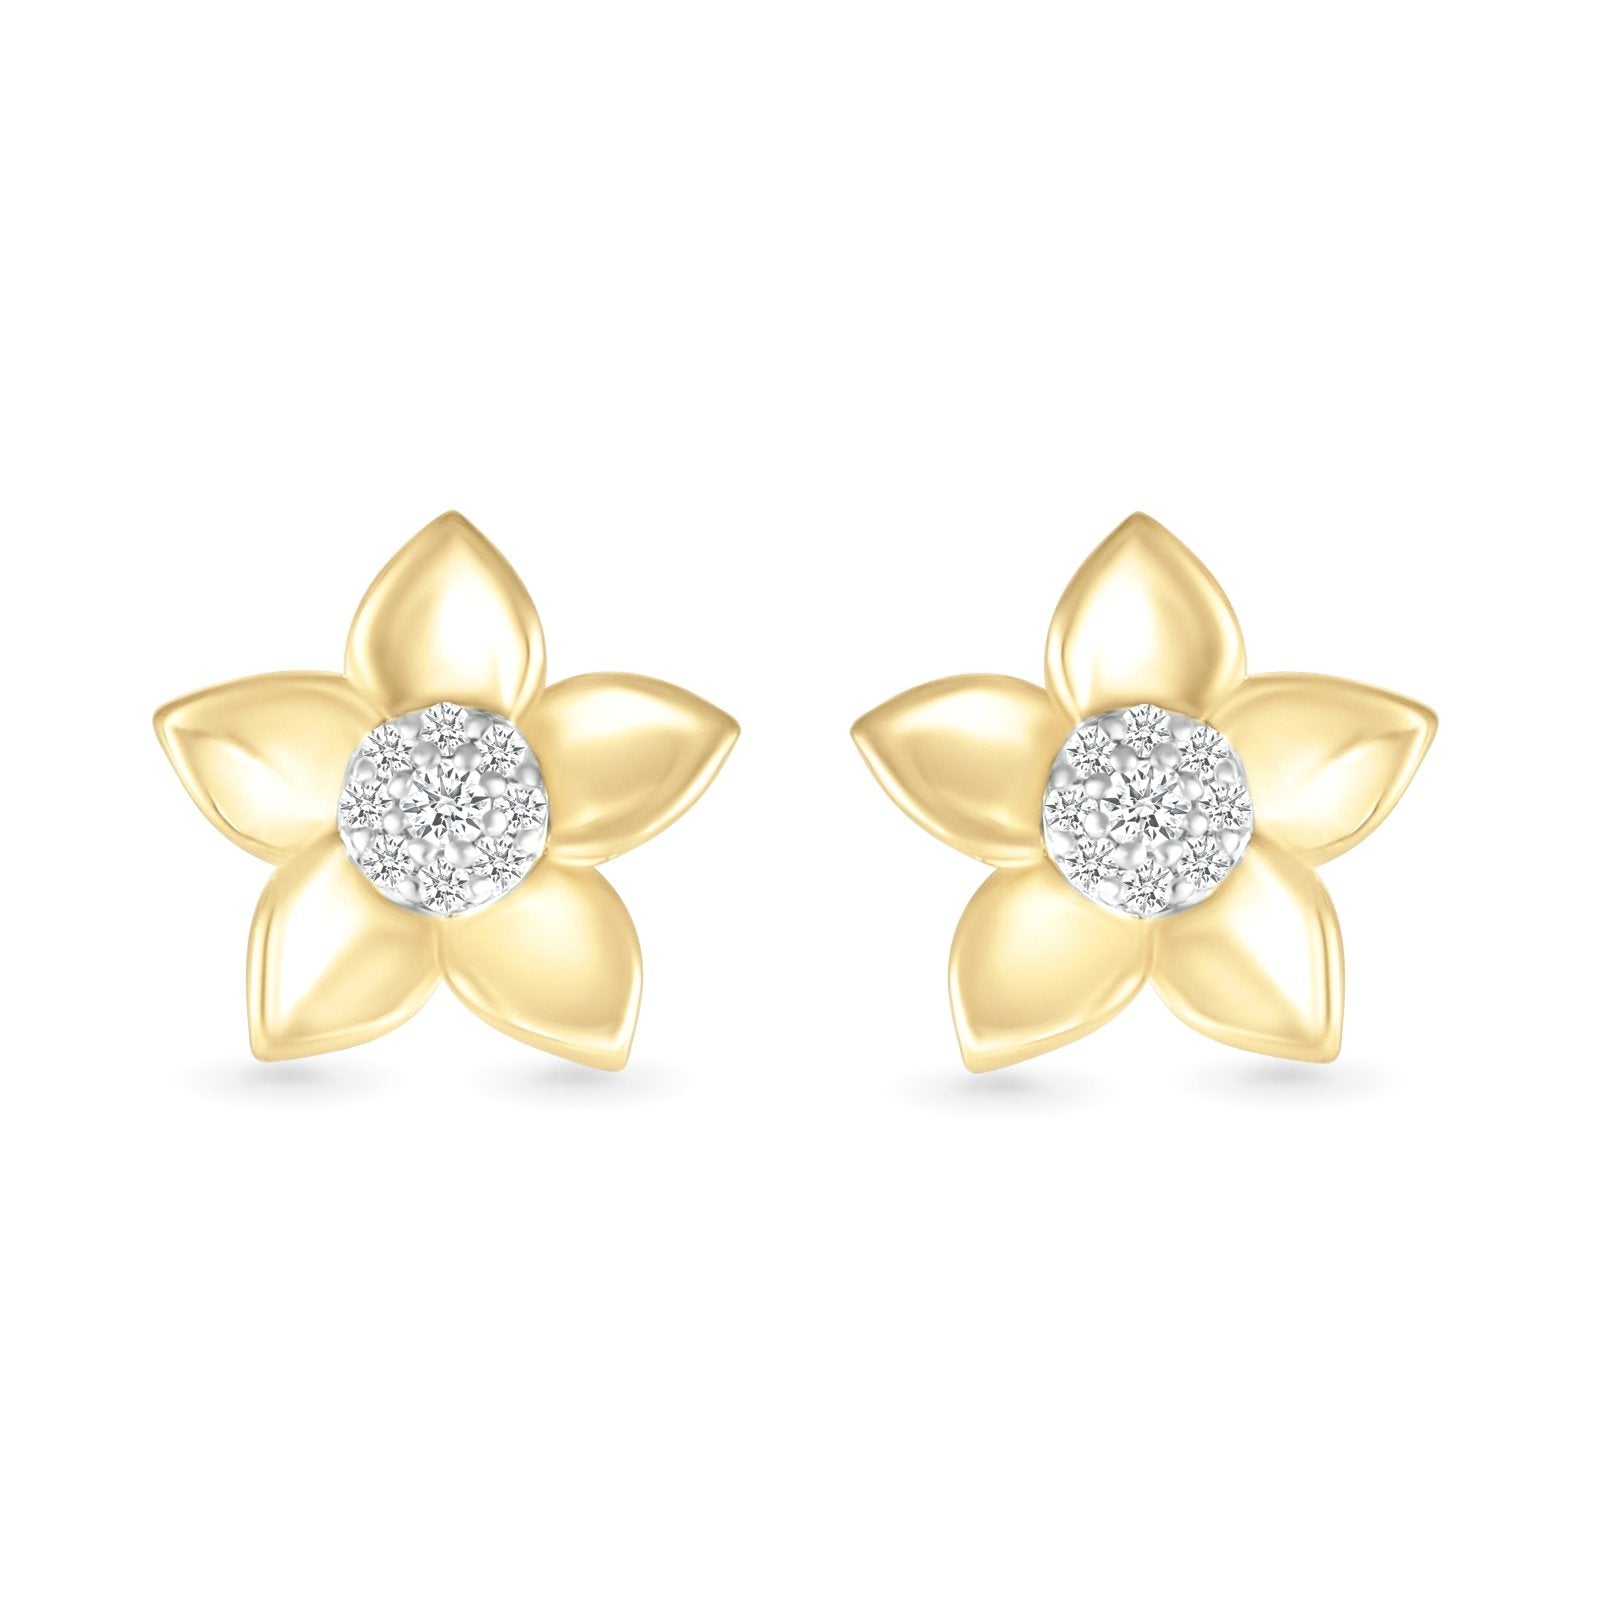 Diamond Pave Center with Five Gold Petal Flower Stud Earrings Earrings Estella Collection 32673 10k April Birthstone Colorless Gemstone #tag4# #tag5# #tag6# #tag7# #tag8# #tag9# #tag10#